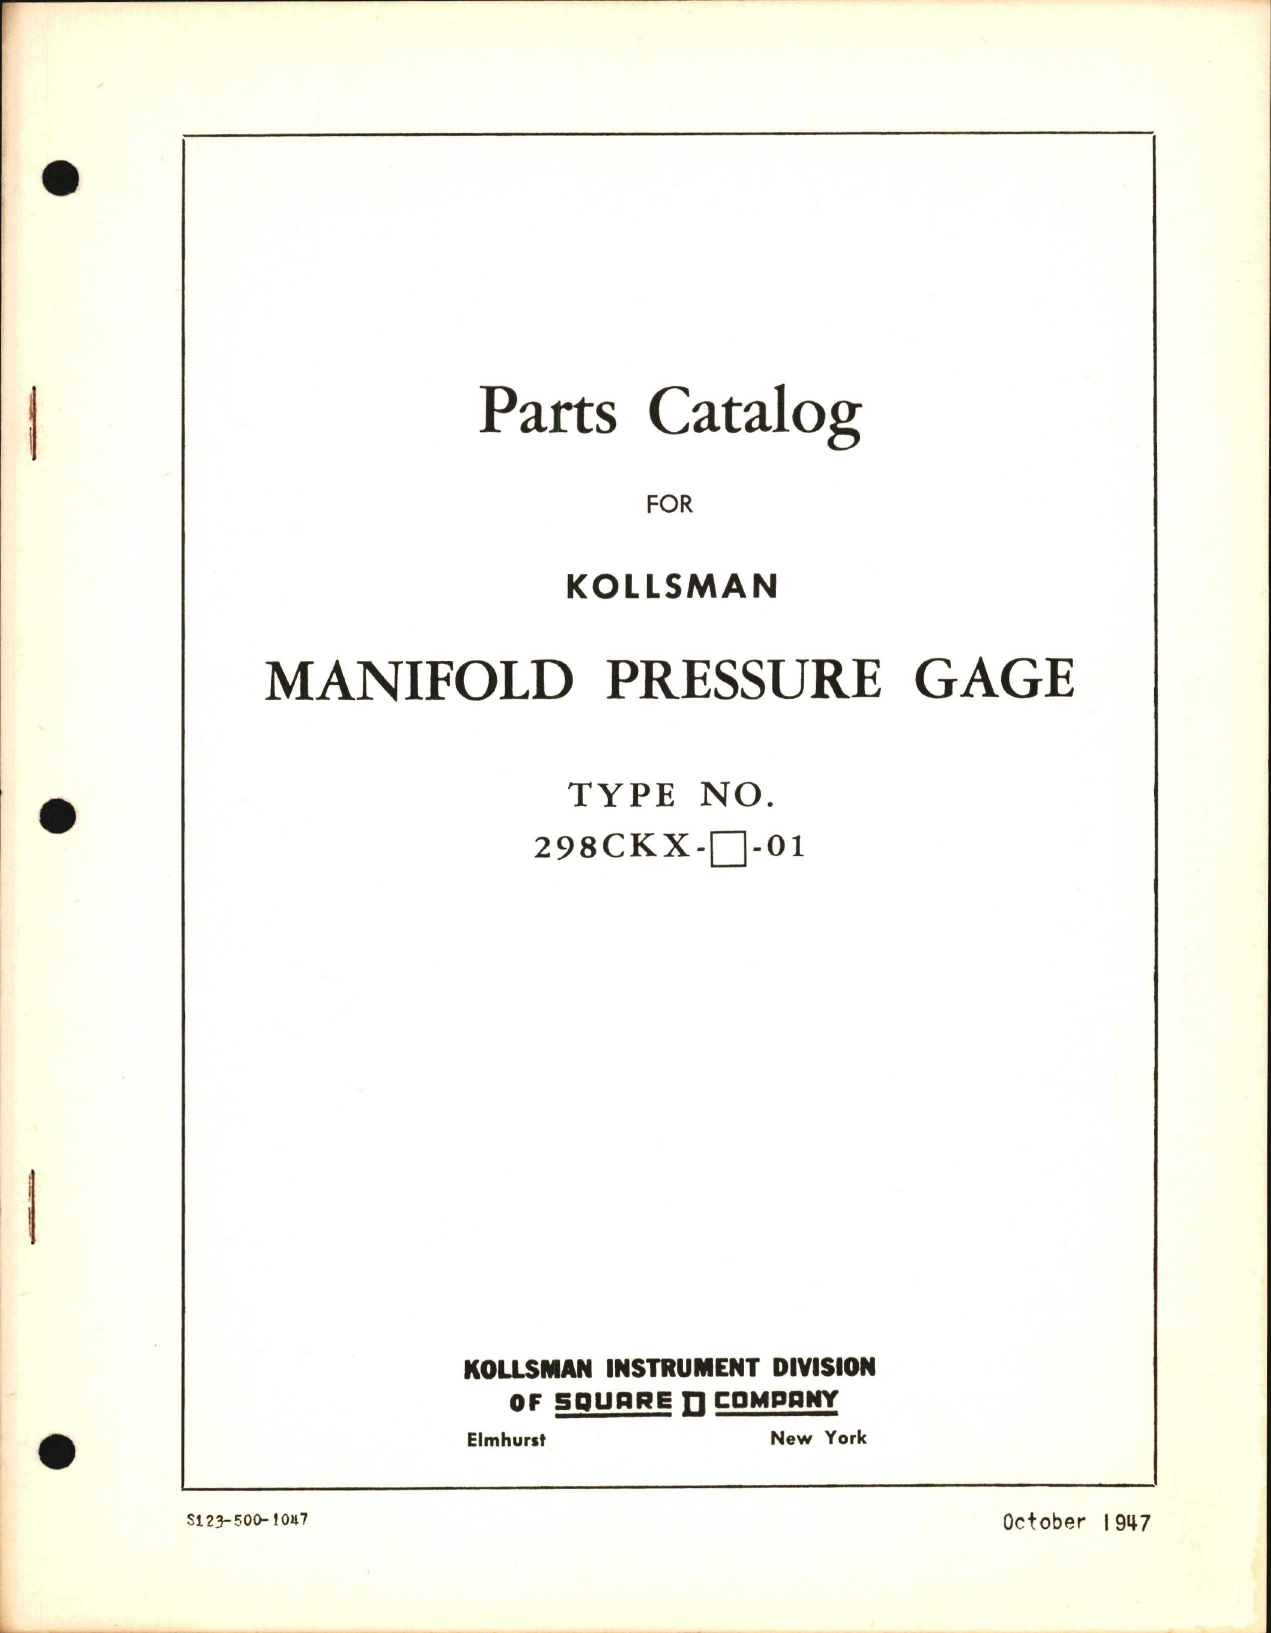 Sample page 1 from AirCorps Library document: Parts Catalog for Kollsman Manifold Pressure Gage 298CKX